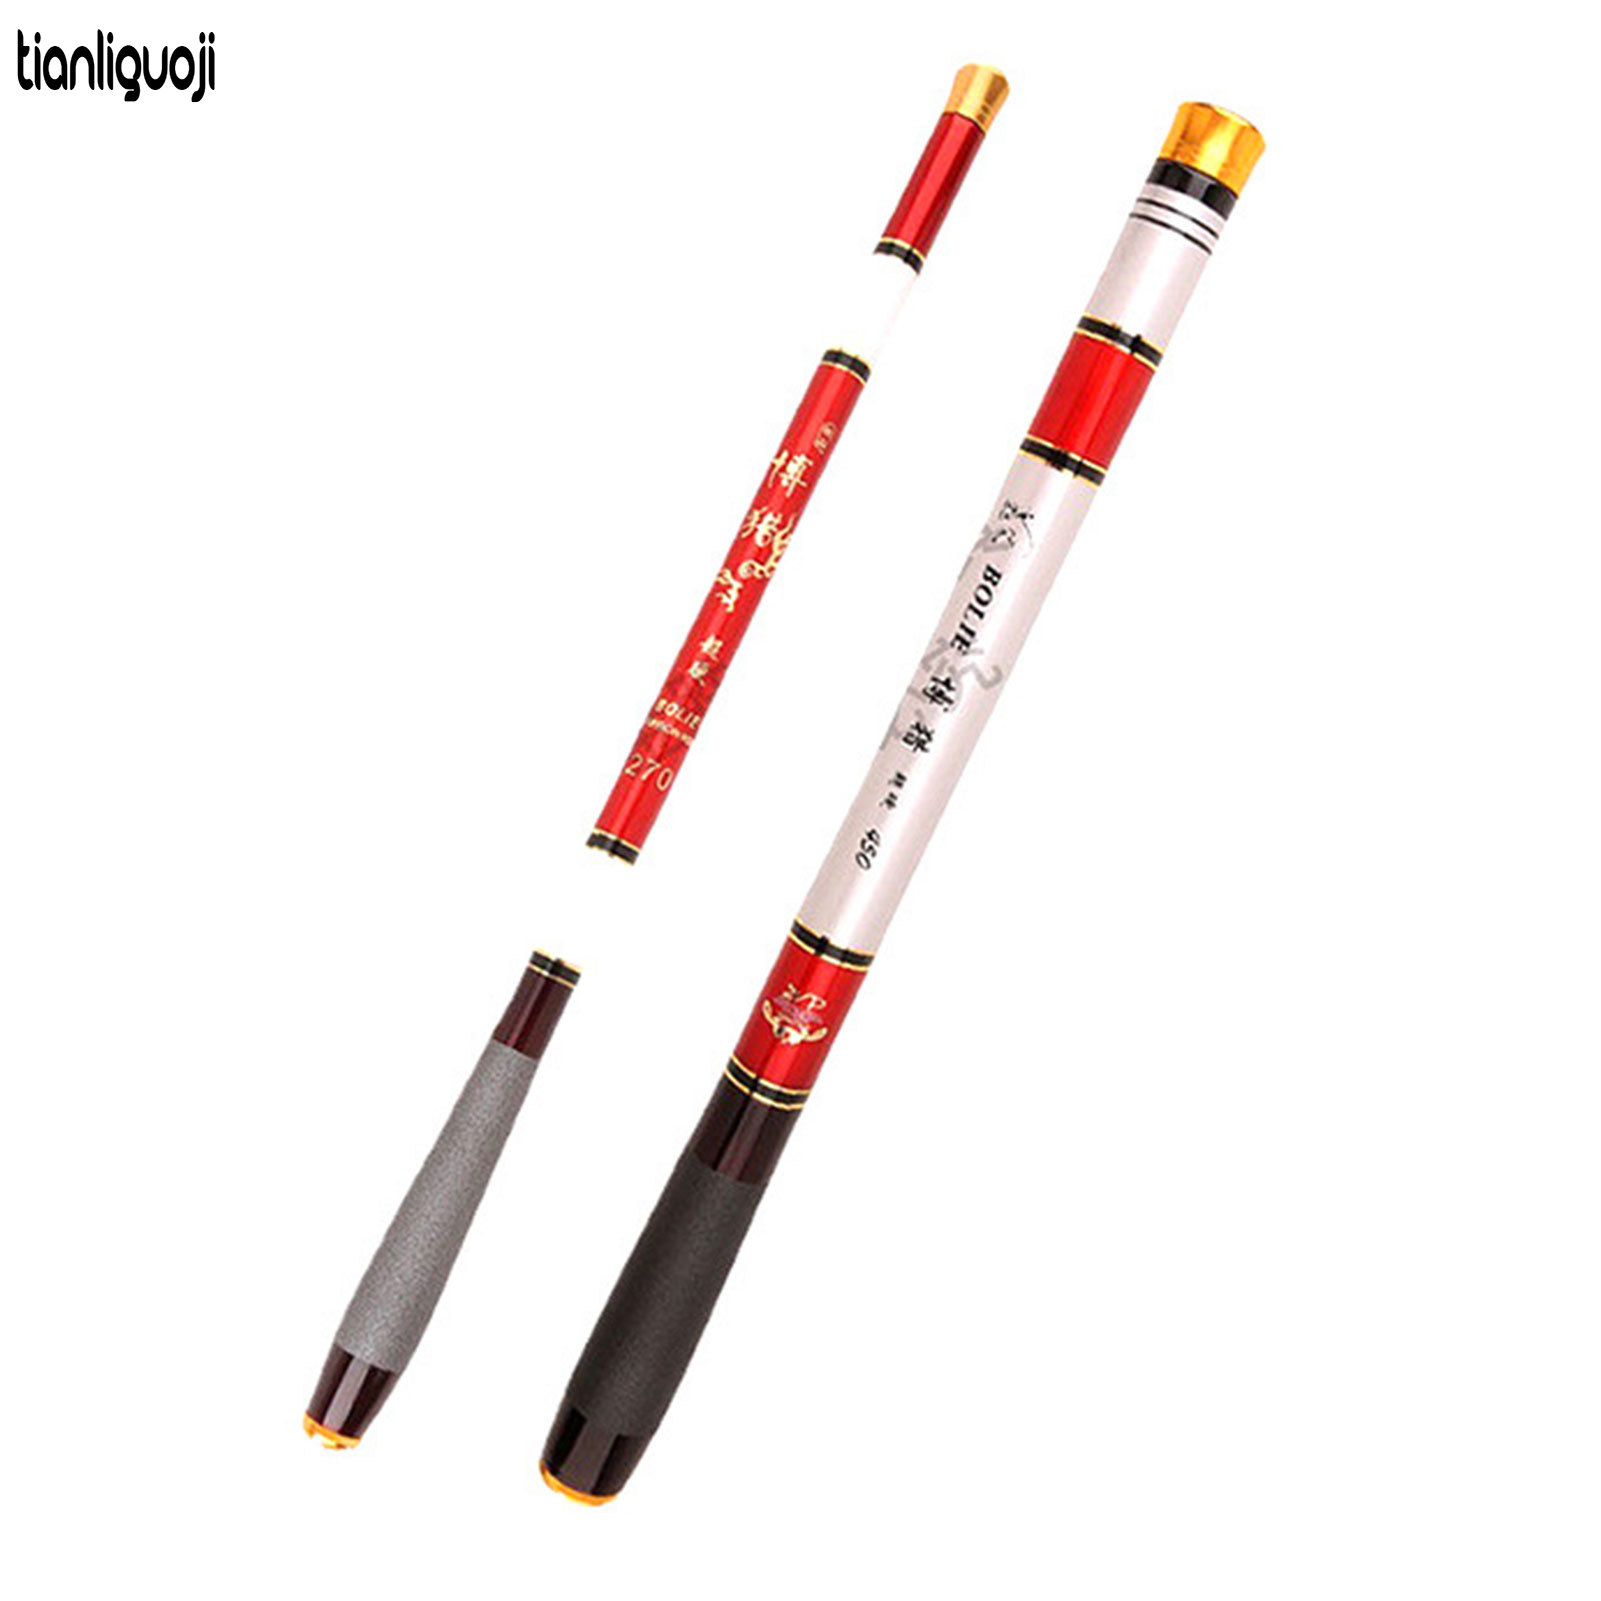 TG Ultra-light Carbon Fishing Rod Wear-resistant Handle Fishing Rod for  Improving Fishing Efficiency